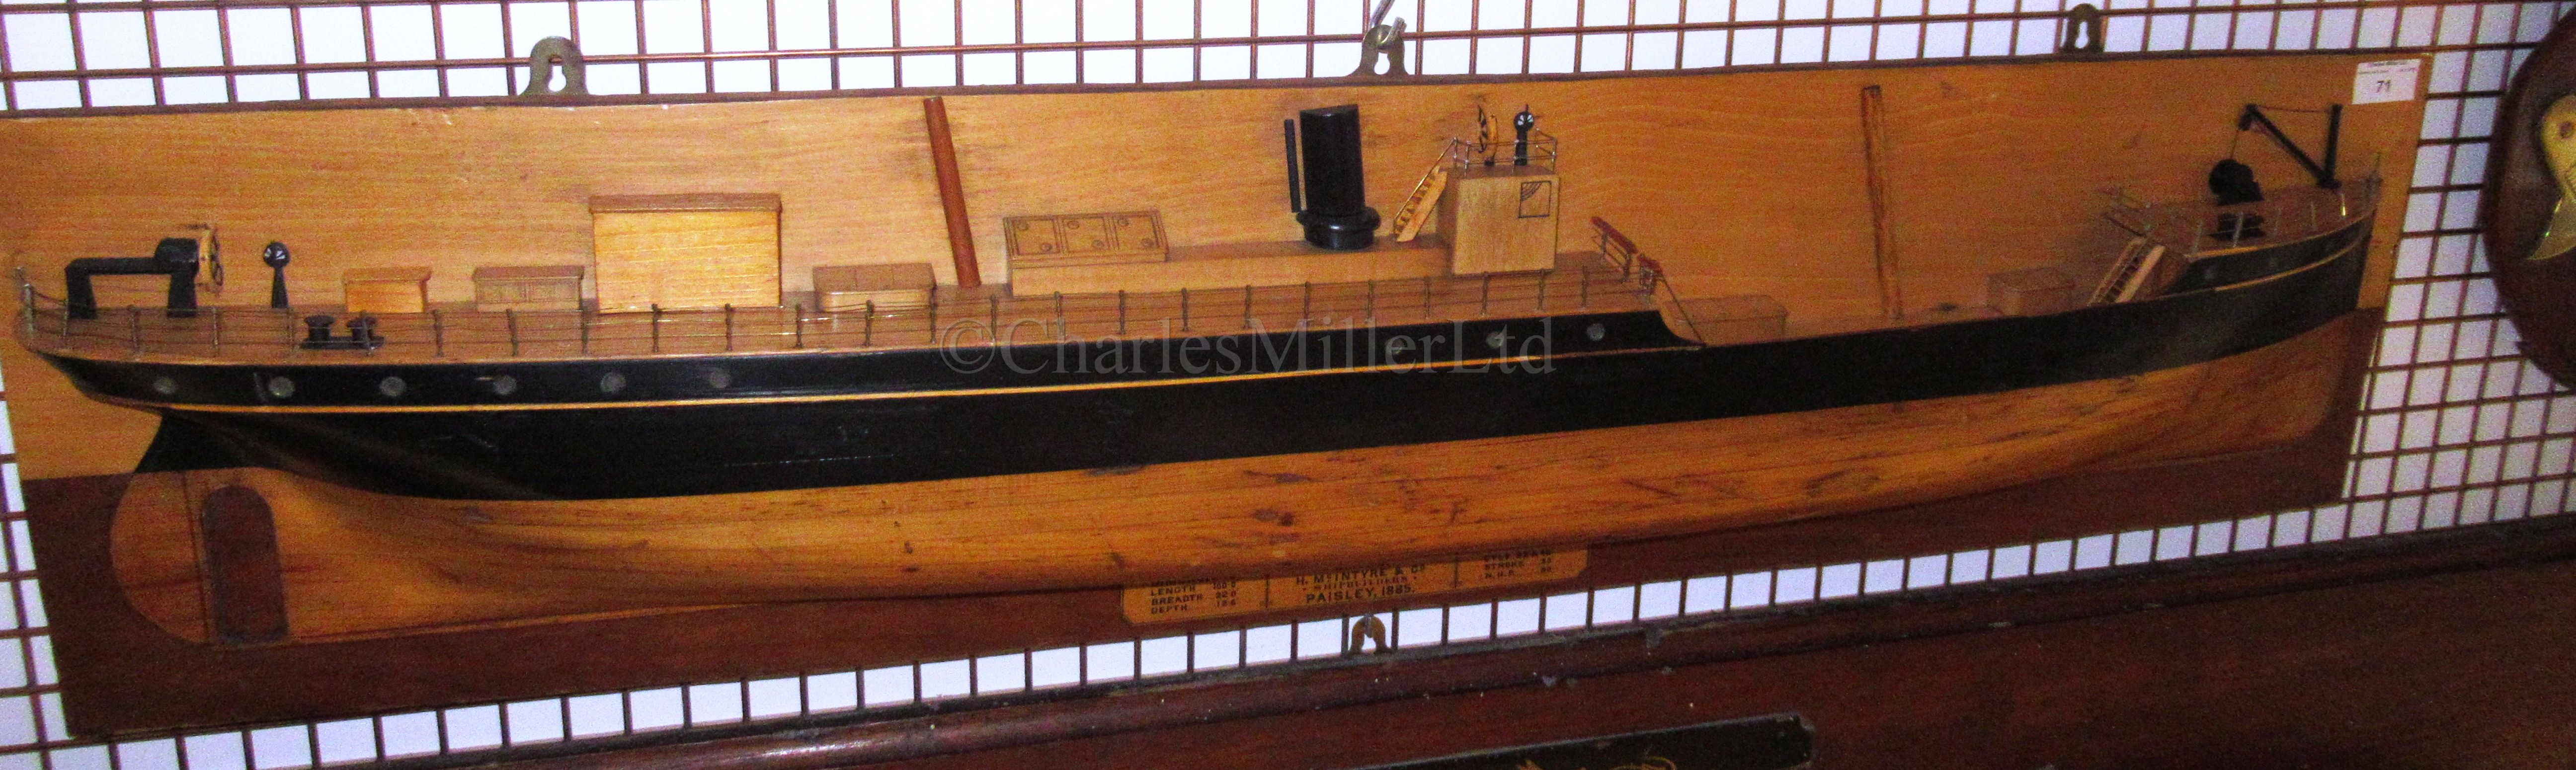 A BUILDER'S HALF-BLOCK MODEL FOR THE S.S NUEVO ACUNA, BUILT BY H. MCINTYRE & CO., PAISLEY, 1885 - Image 10 of 10